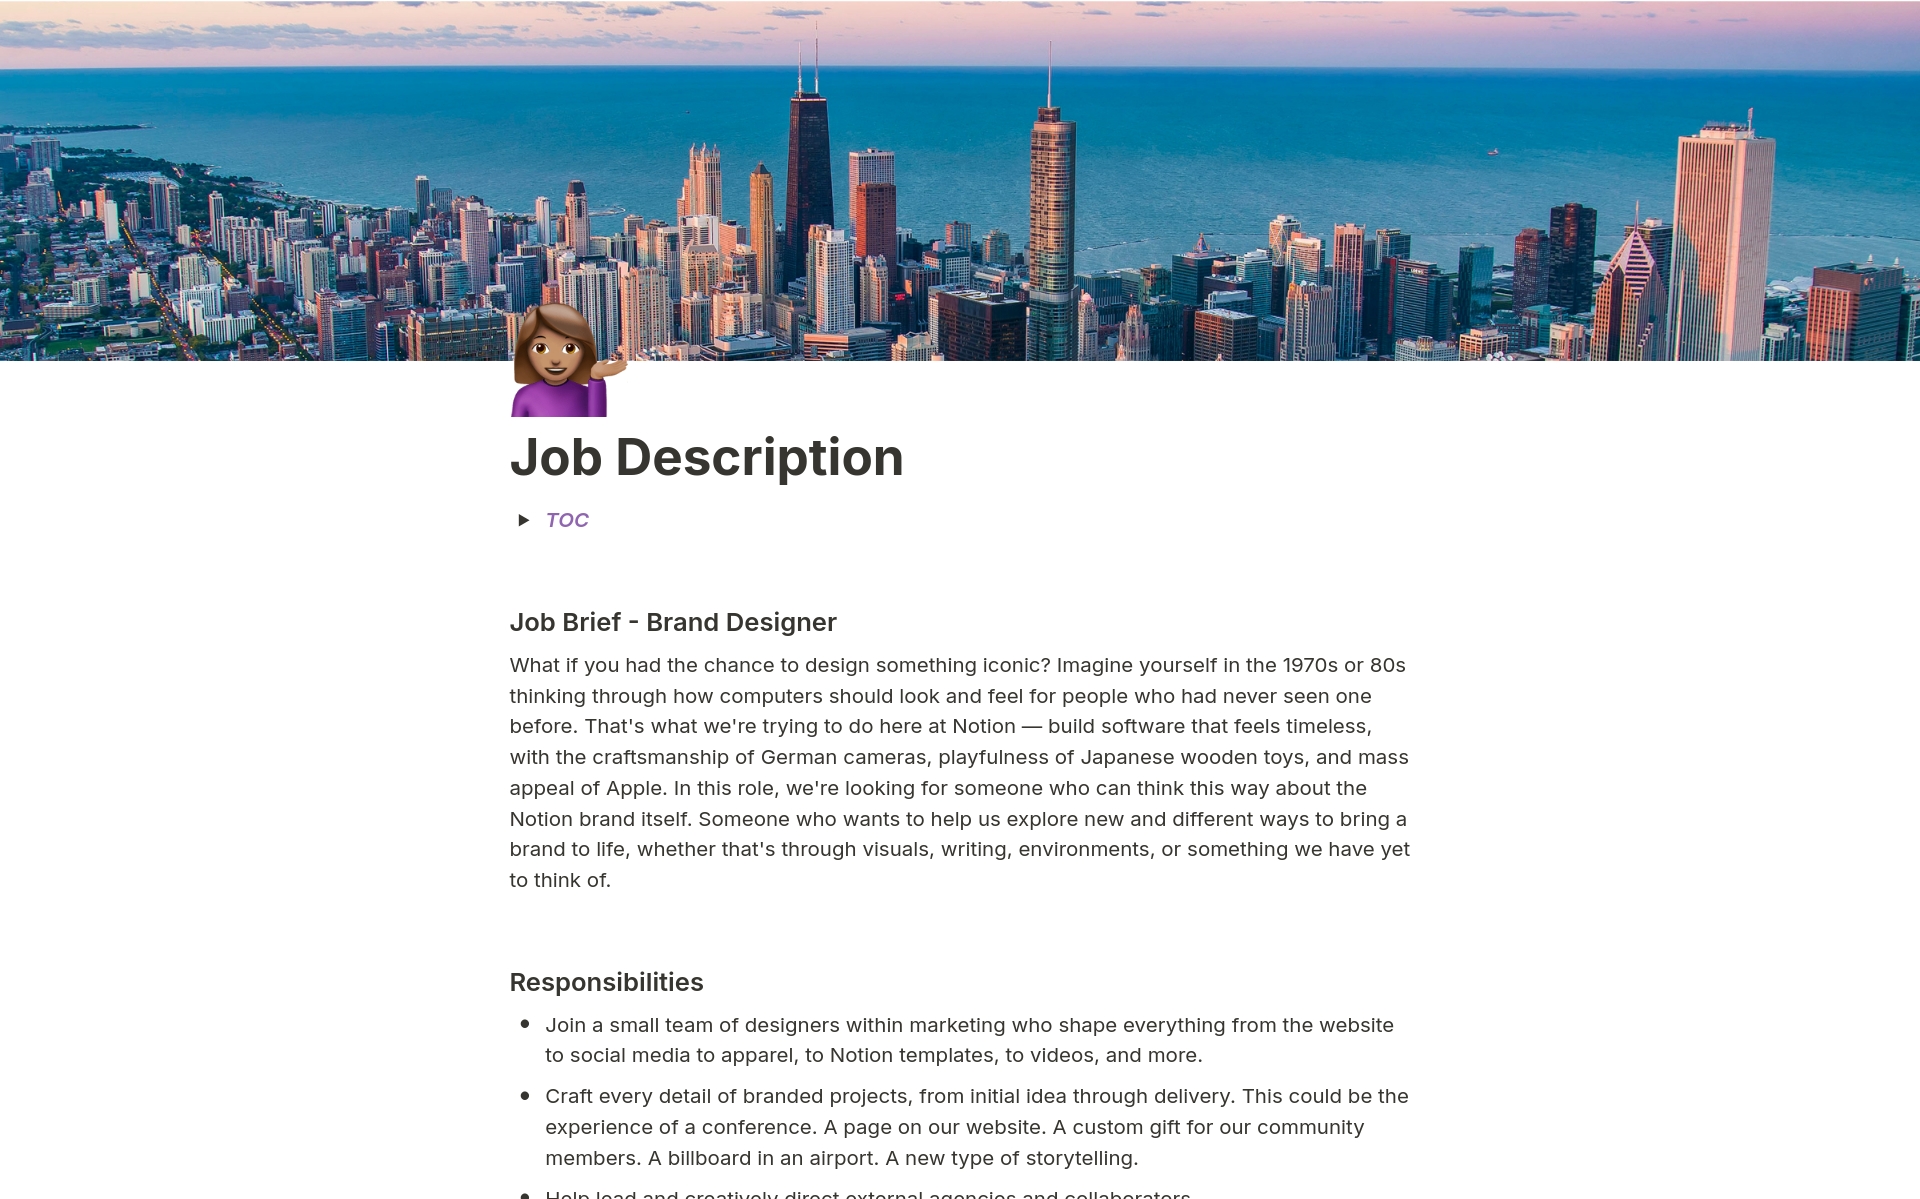 This template is perfect for organising your job description information into a single page.